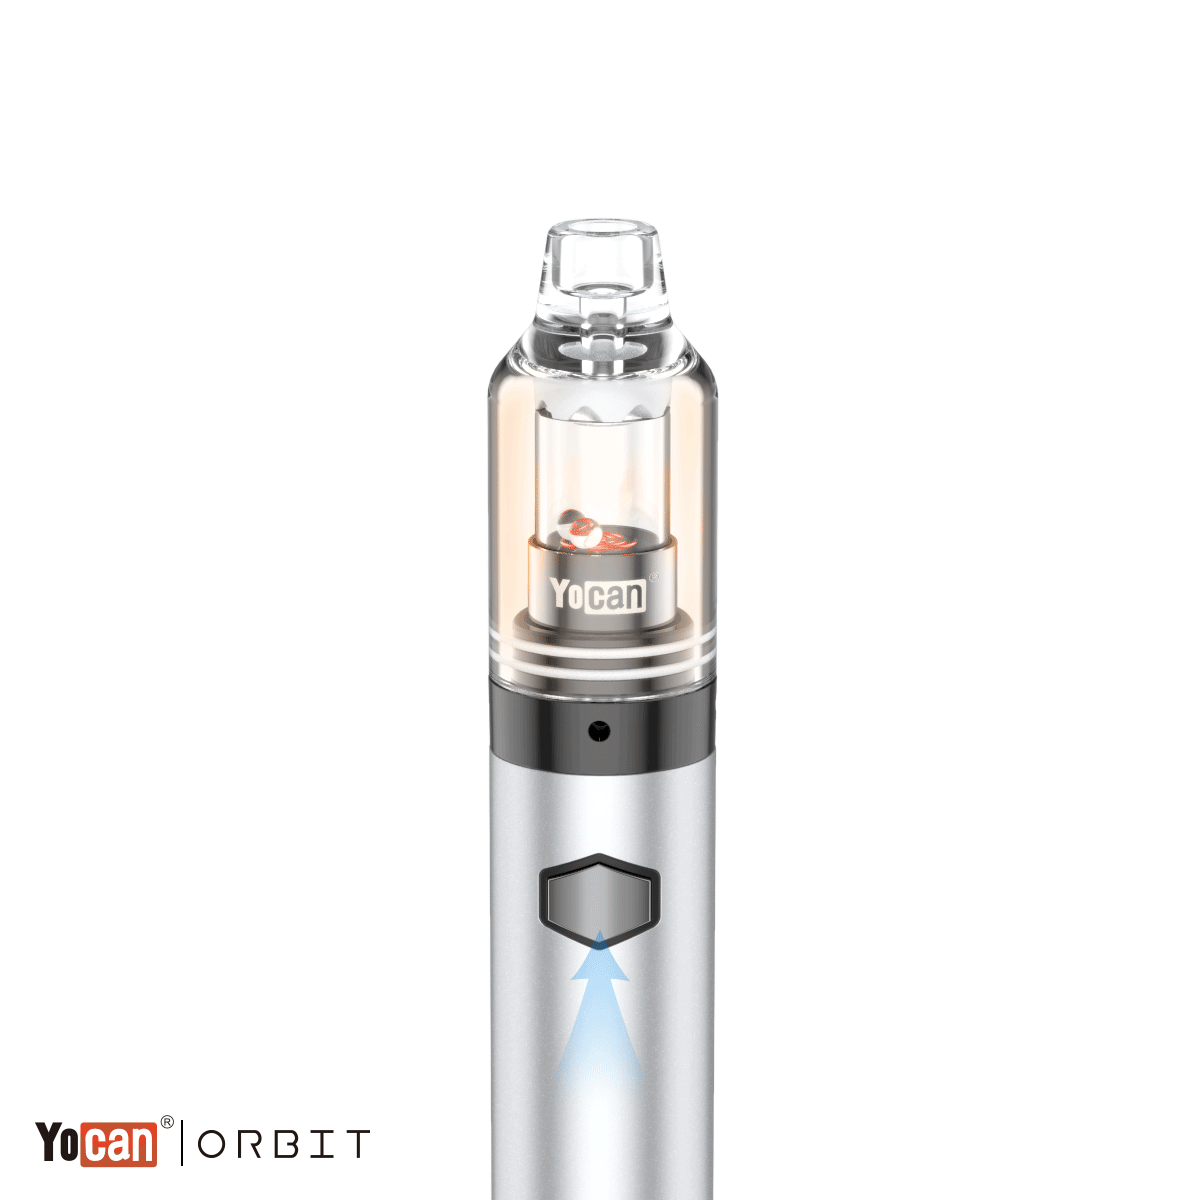 The Yocan orbit converts the energy of airflow into the kinetic energy of quartz balls. It has abandoned the complexity and inconvenience of the traditional dab rig.